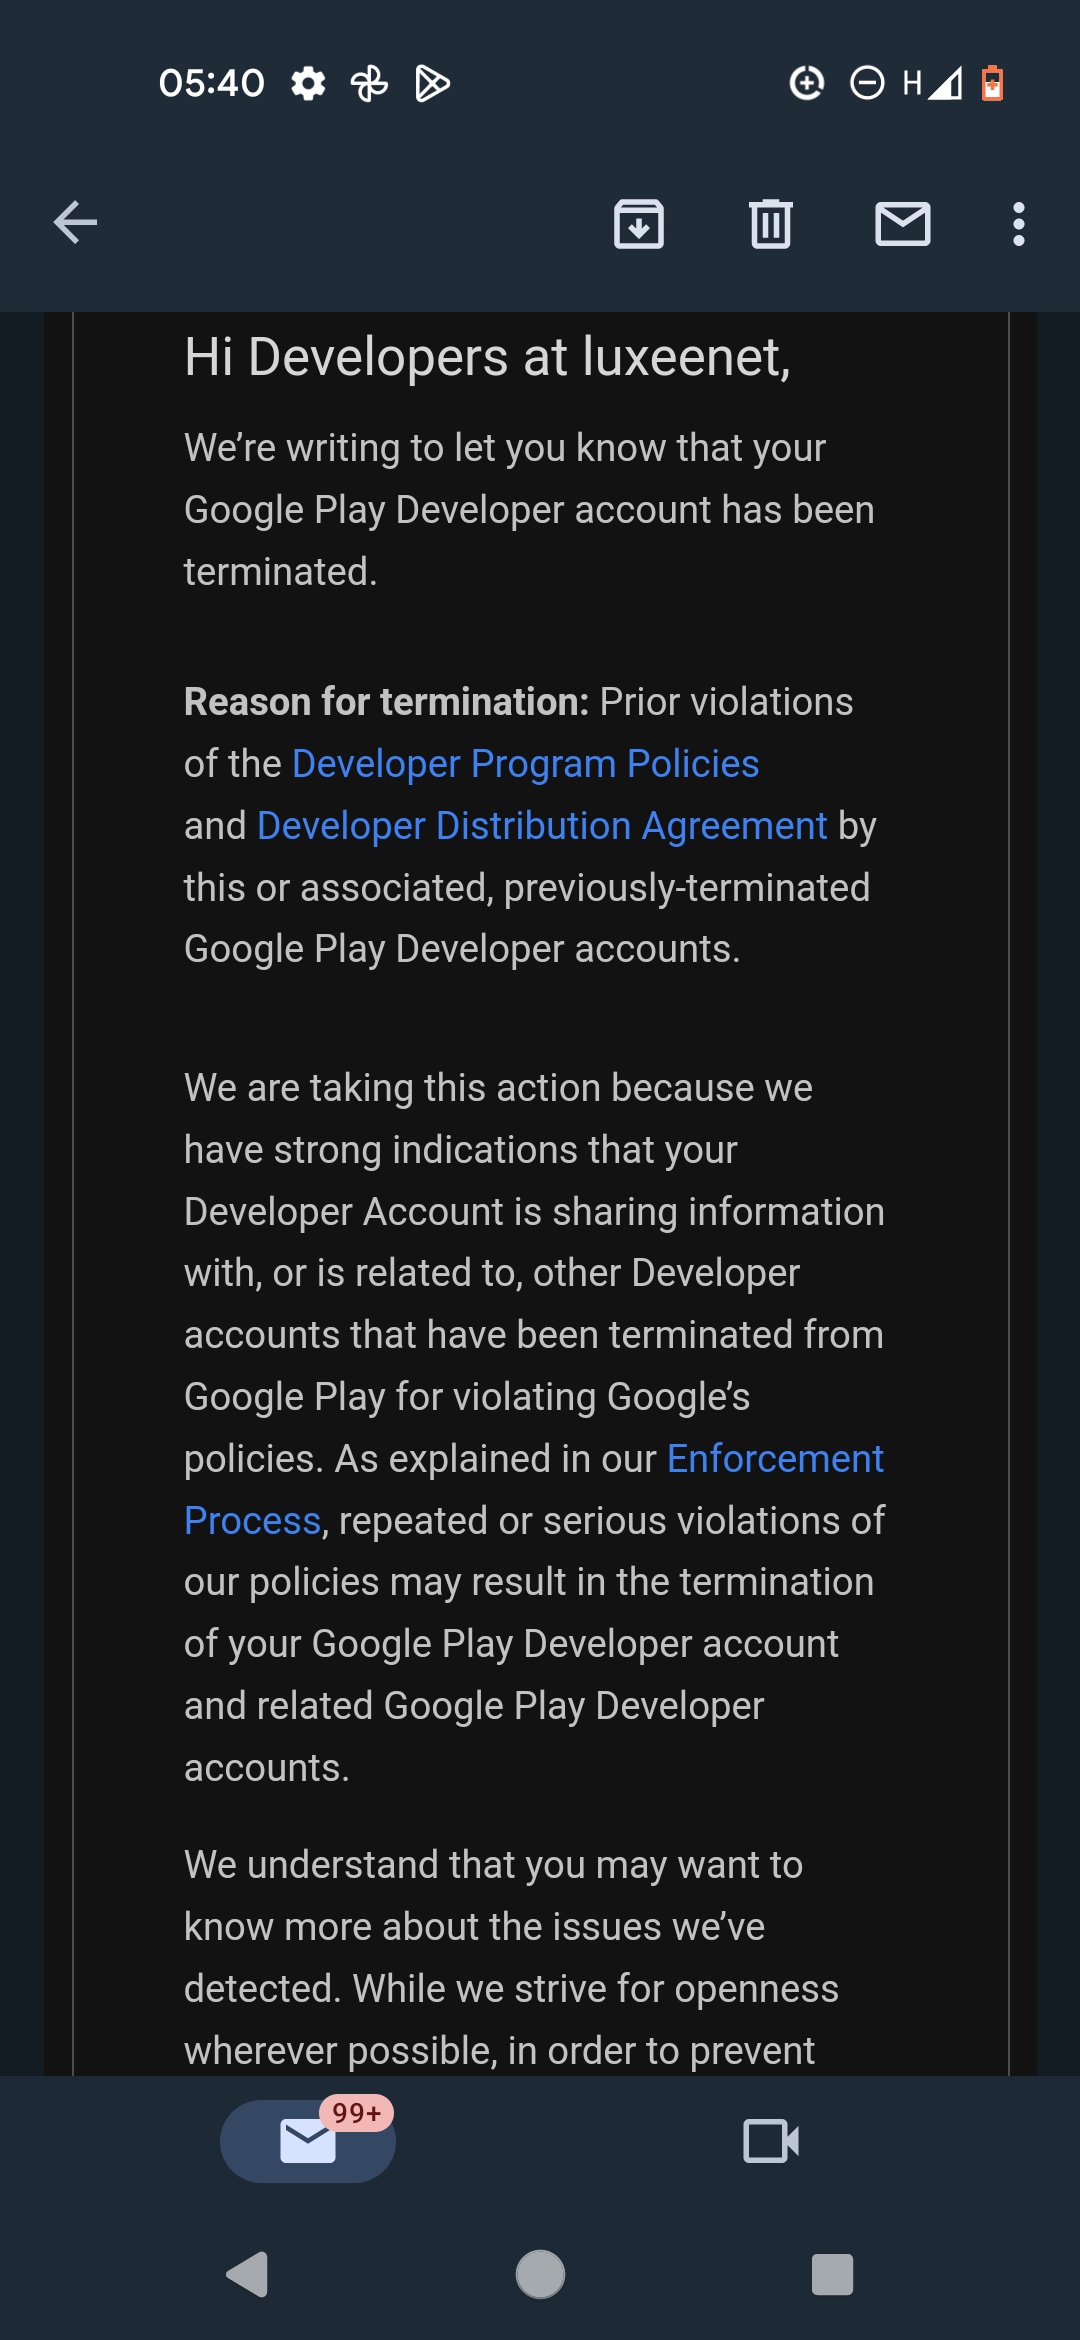 Why you google terminated my account for no reason, my account